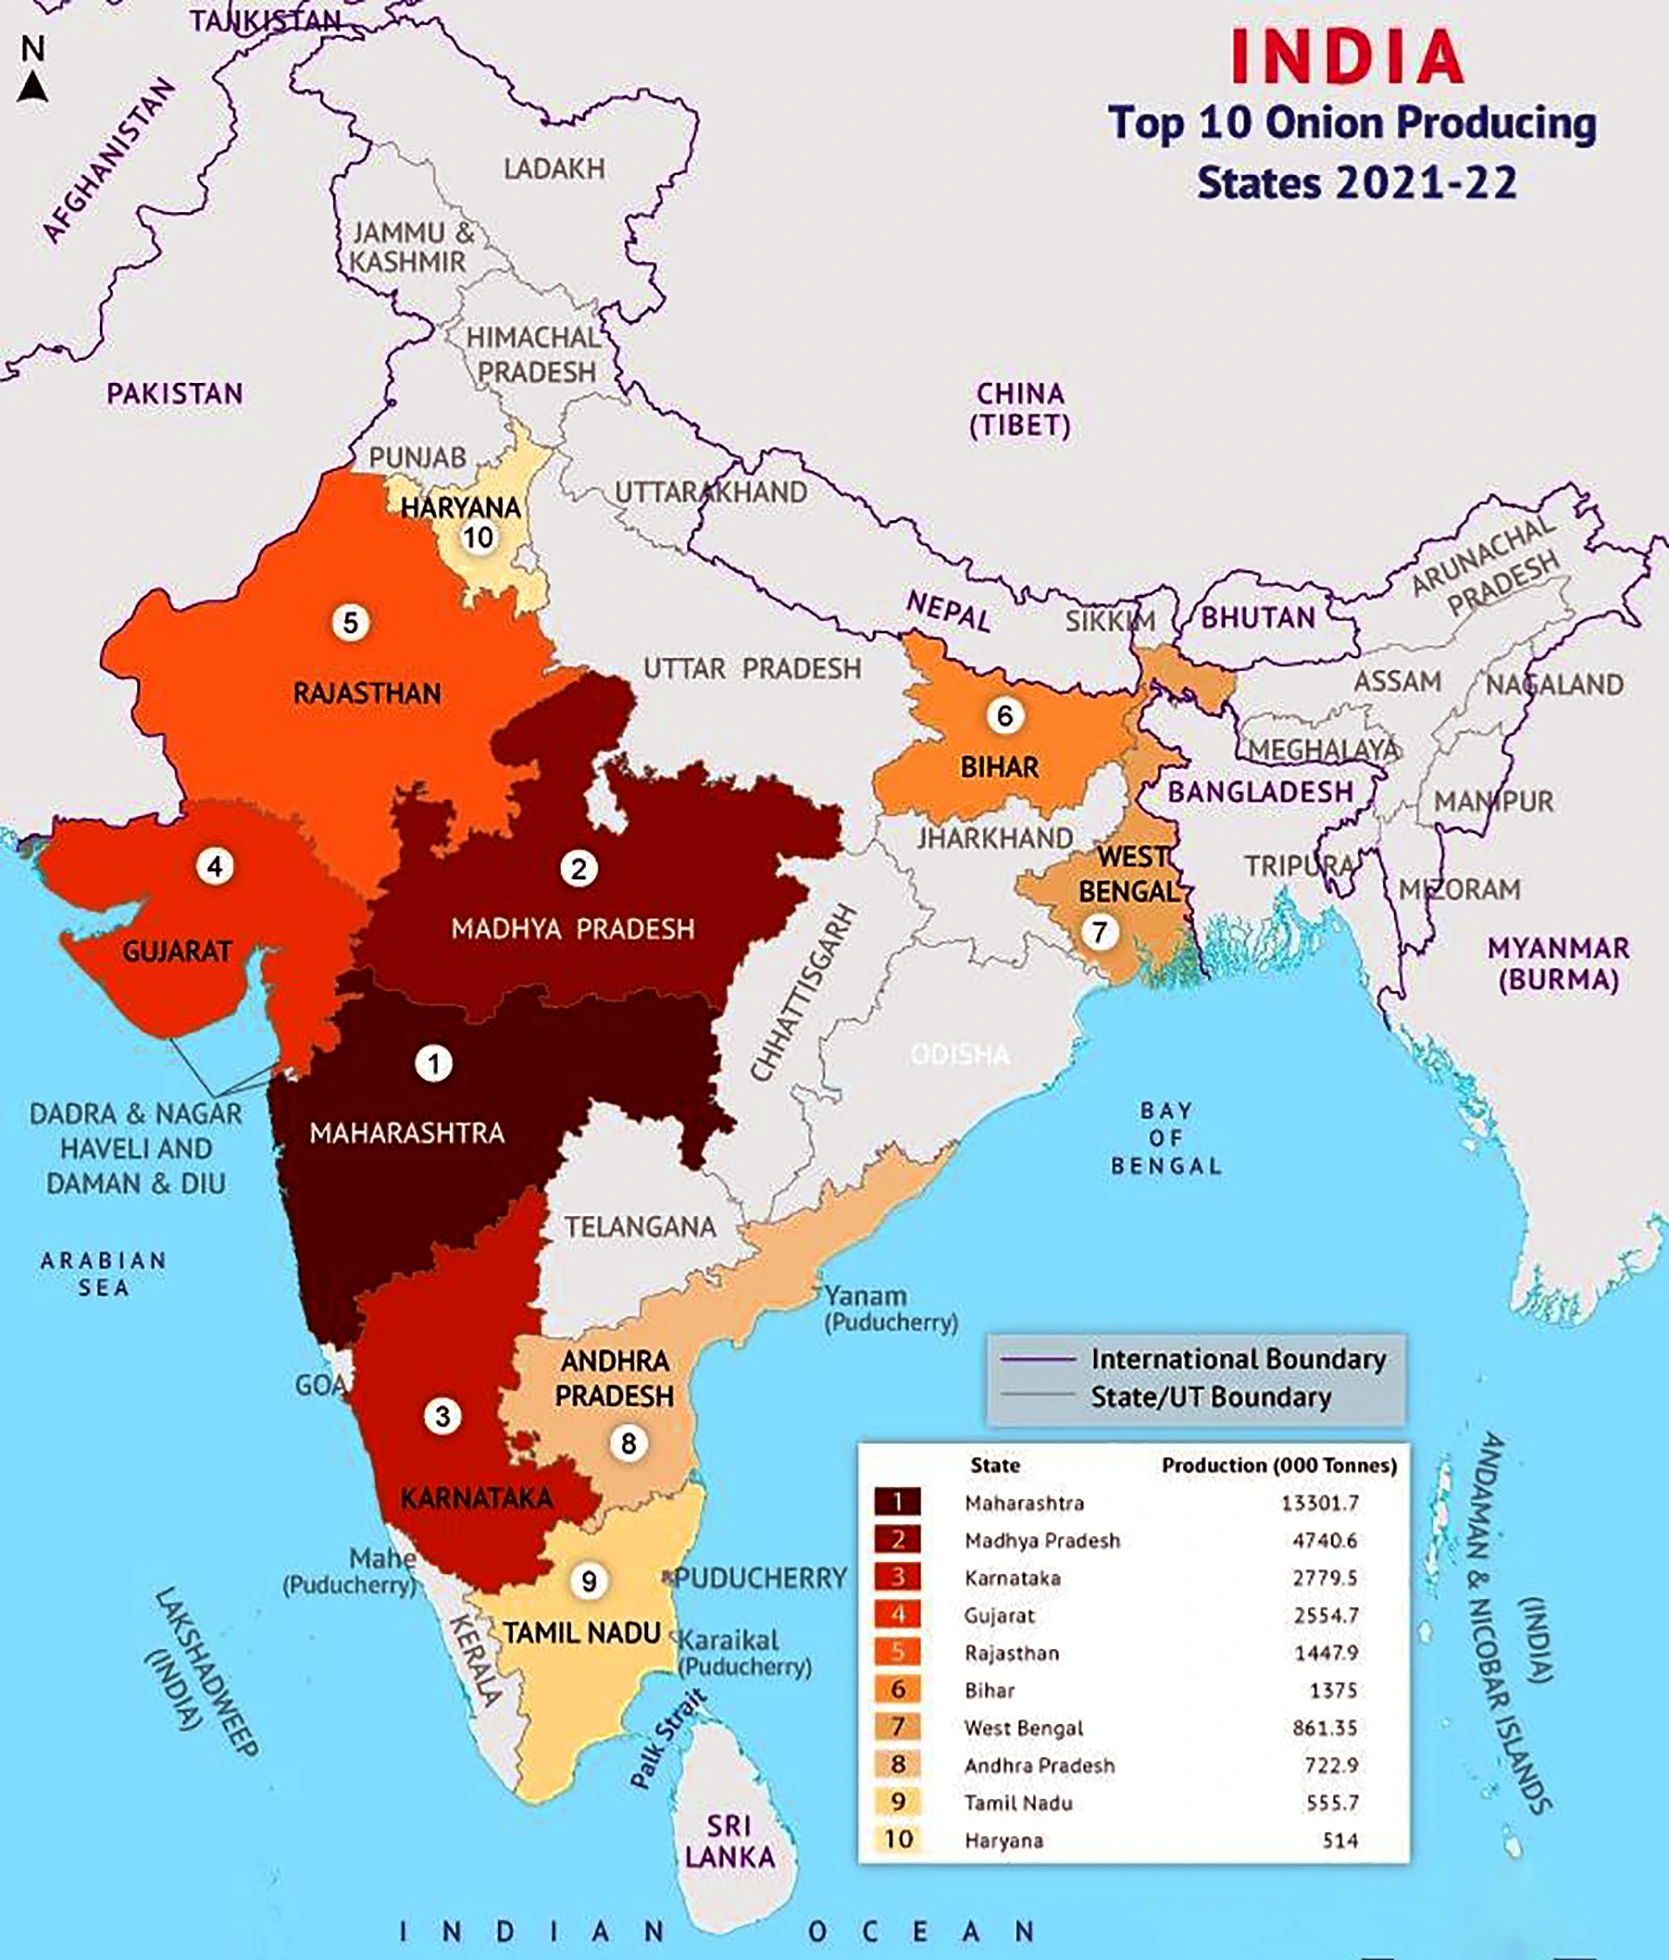 Fluctuations In Onion Prices In India | Map | UPSC | UPSCprep.com